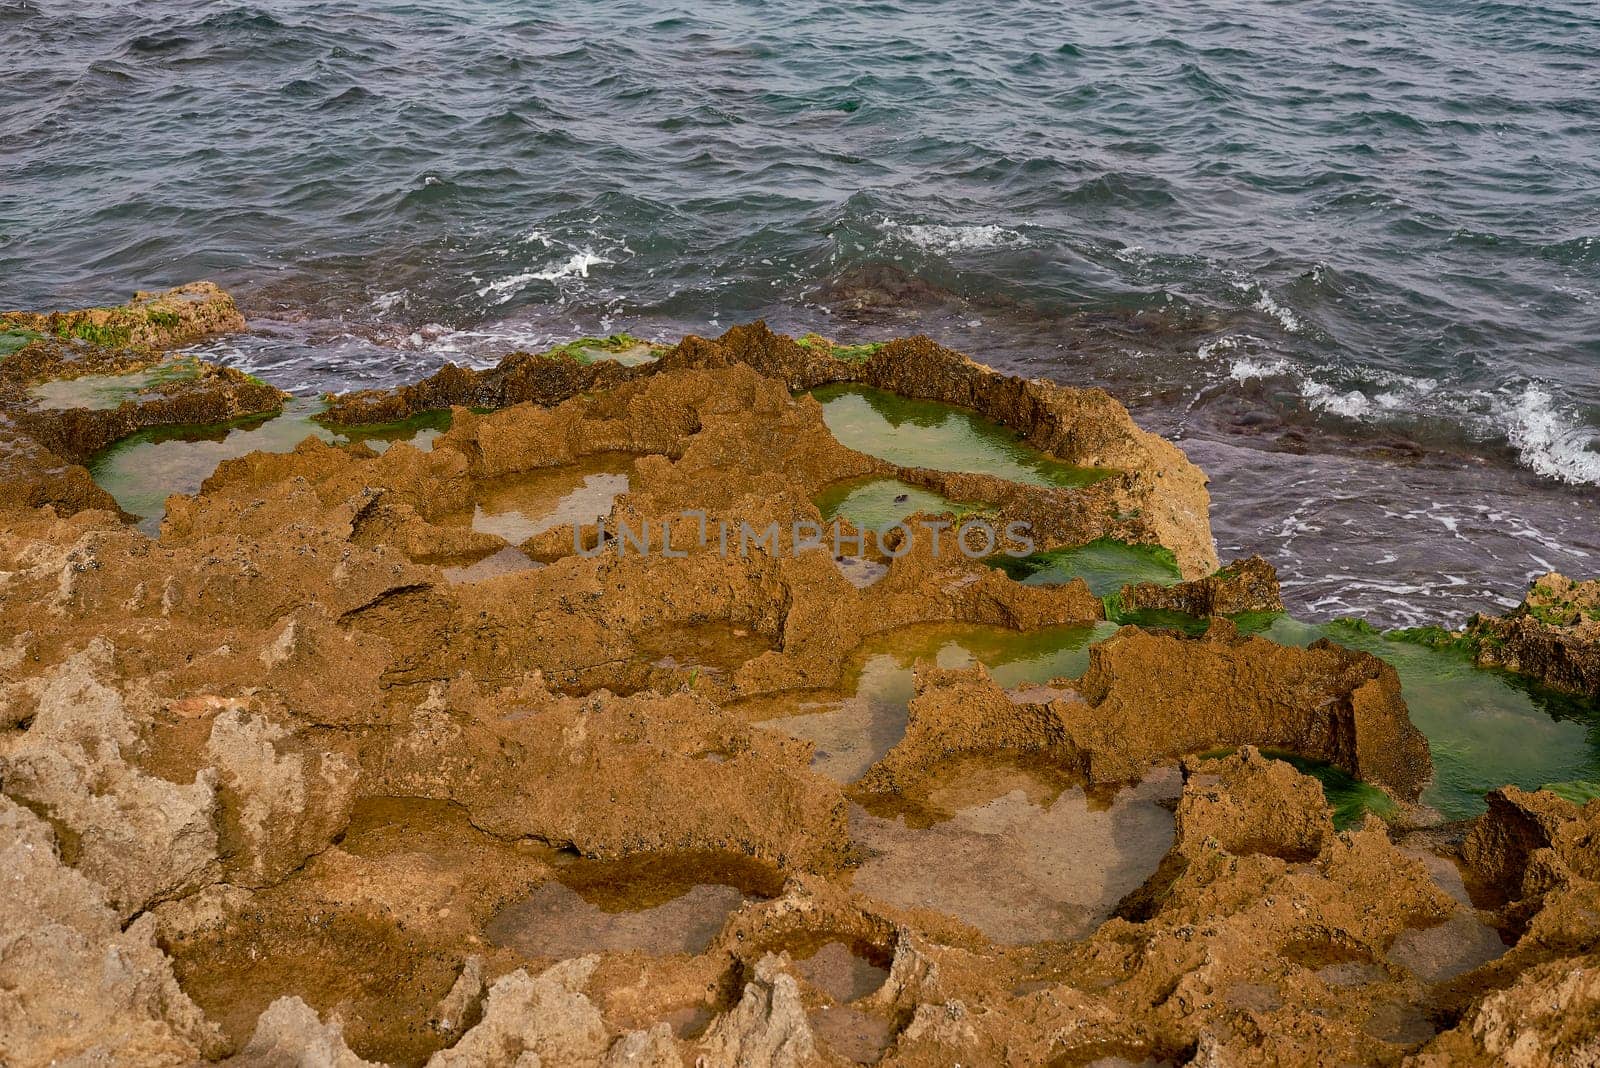 A rocky beach with seaweed and waves lapping on it. rough water, zenithal view, solitary, sea foam